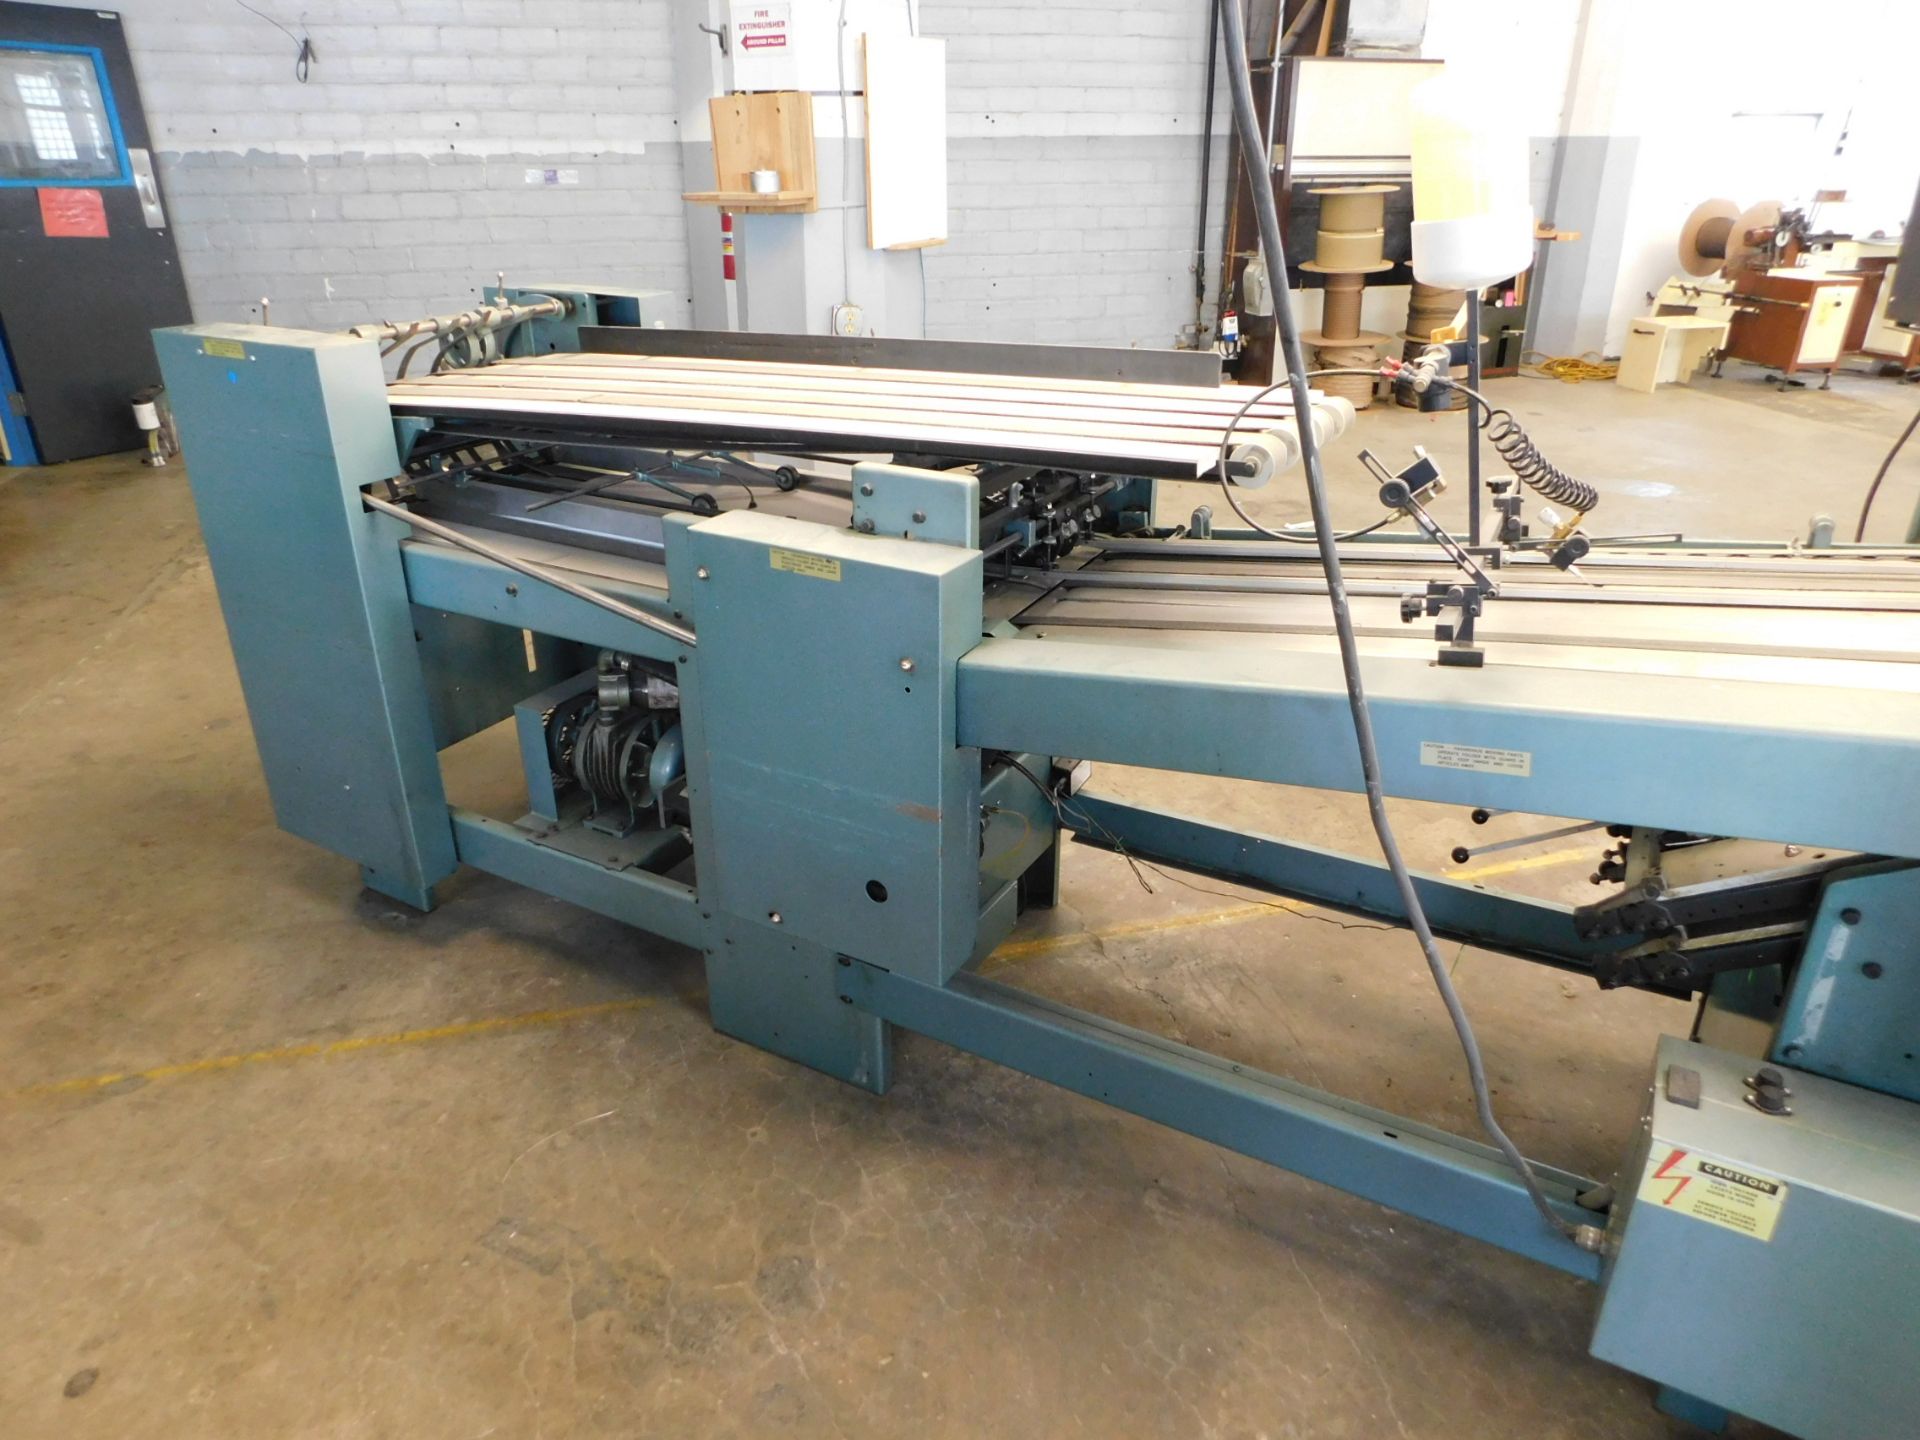 Baumfolder 720 - 20 x 26 700B folder with 8 page unit, includes 700B - 20 x 20 8pp folding unit with - Image 6 of 7